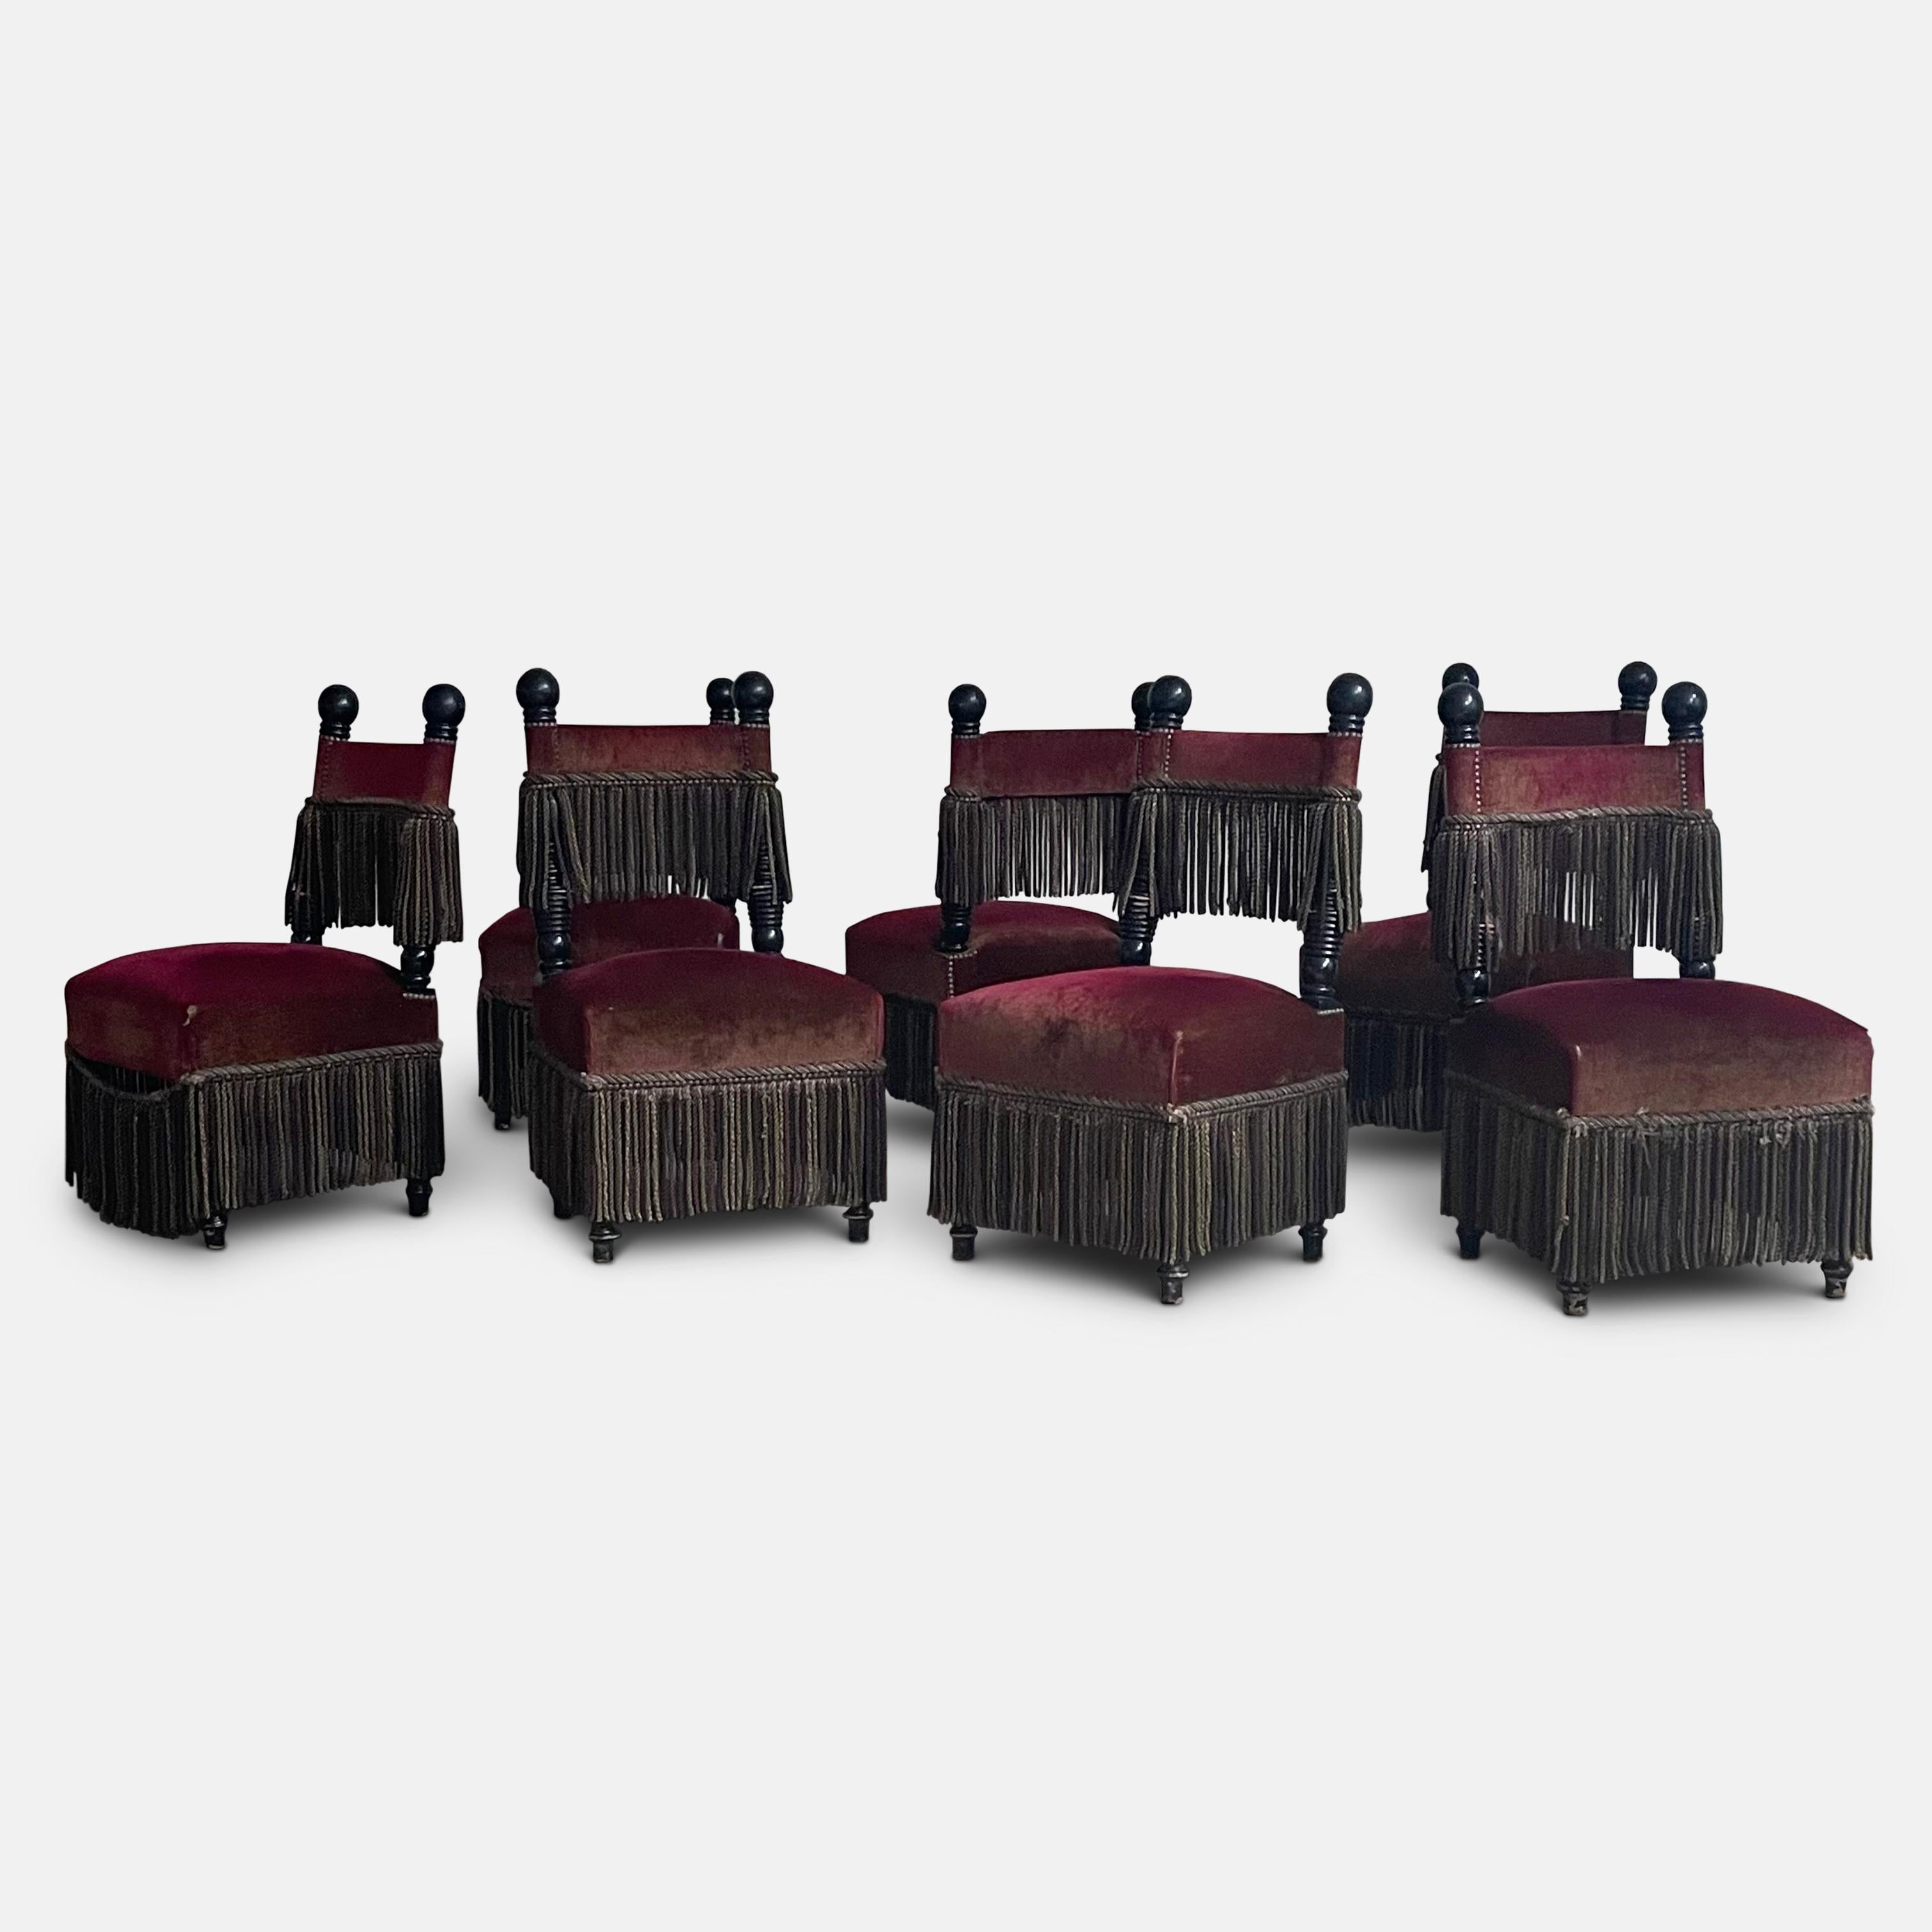 Modern Fringed Chairs From Ladurée Patisserie For Sale